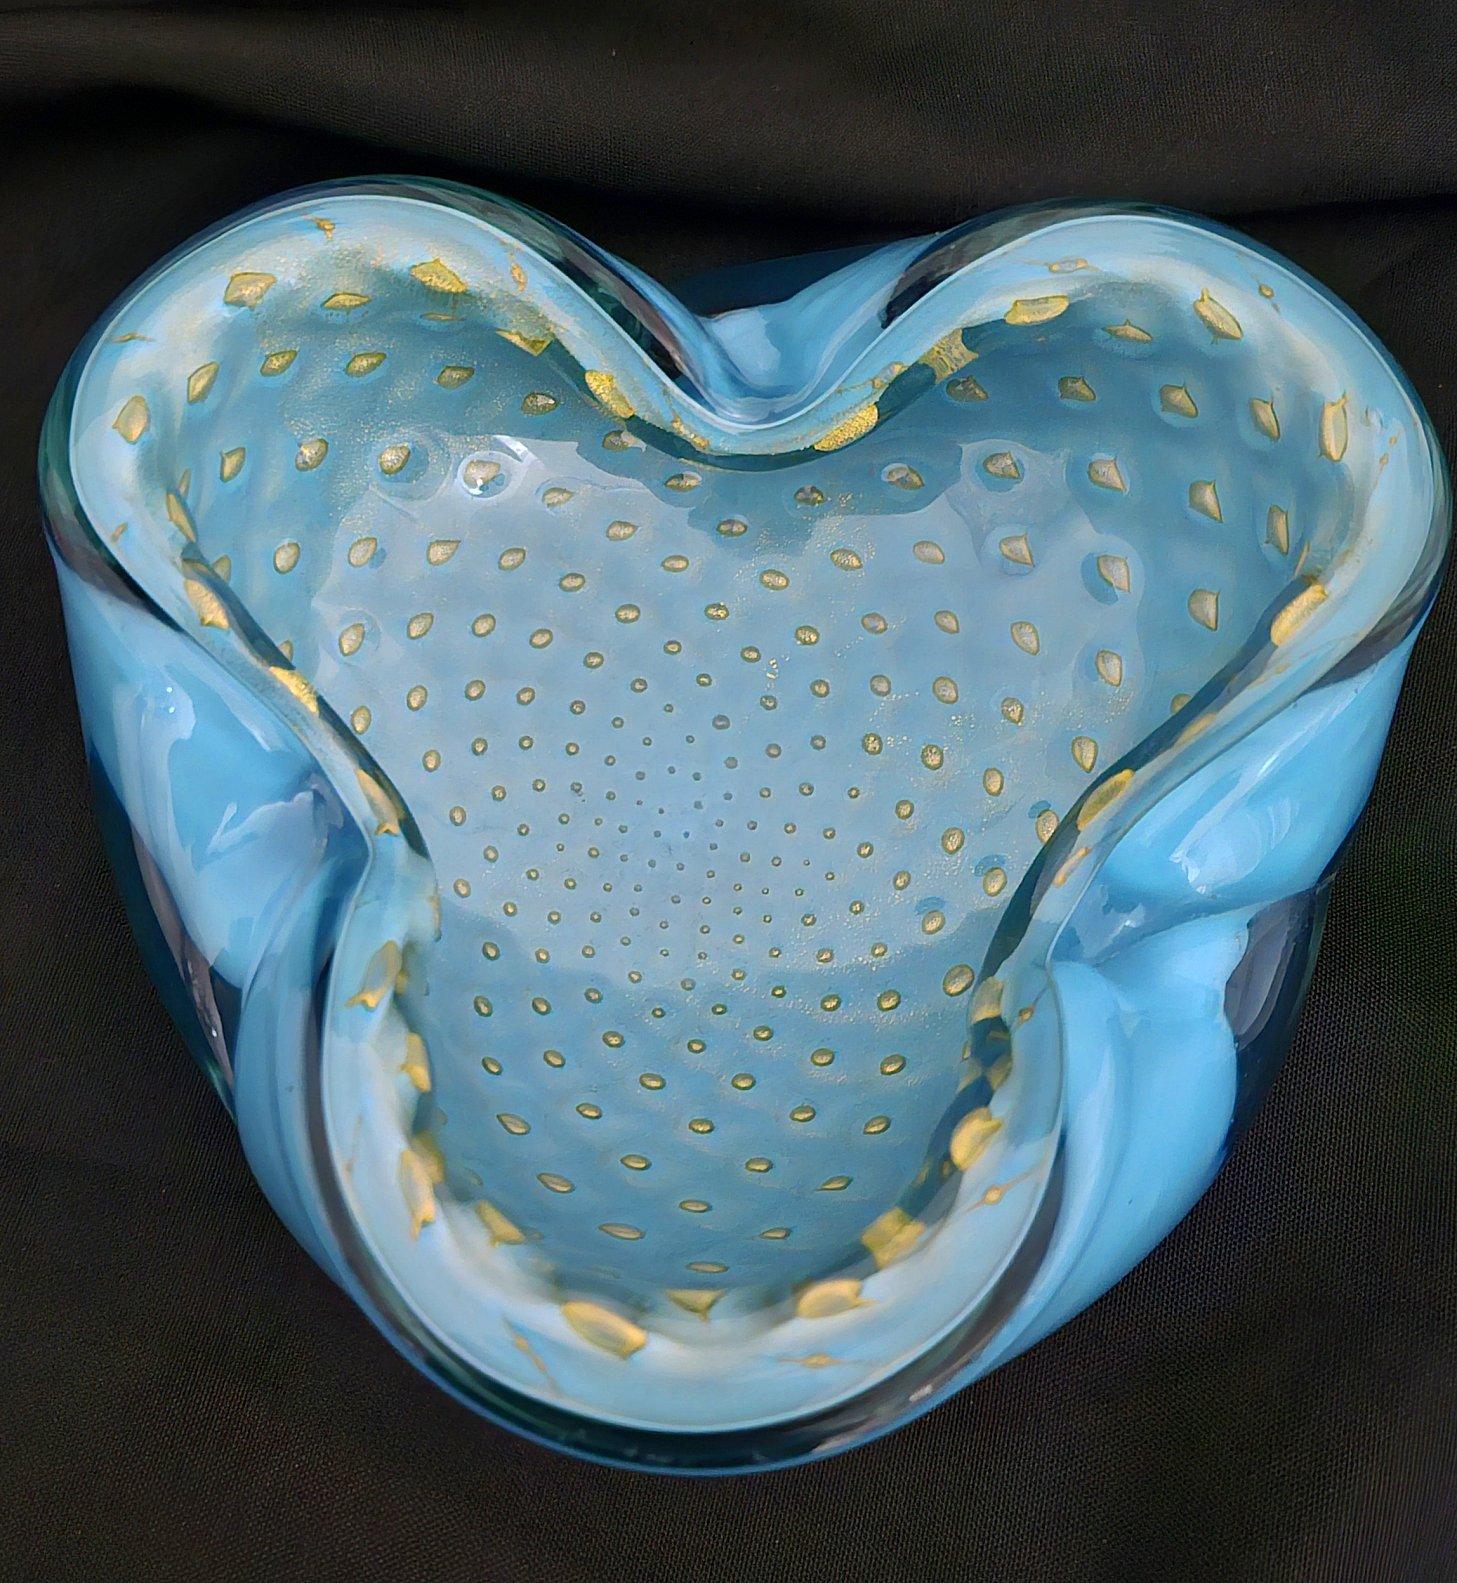 Alfredo Barbini Murano Glass Bowl with Bullicante & Gold Polveri
May function as an ashtray, bowl, trinket dish, or similar vessel, or as a unique art piece for display.
Colors: blue with gold polveri
Type: Murano hand blown glass
Size: Apx 6 x 2.75